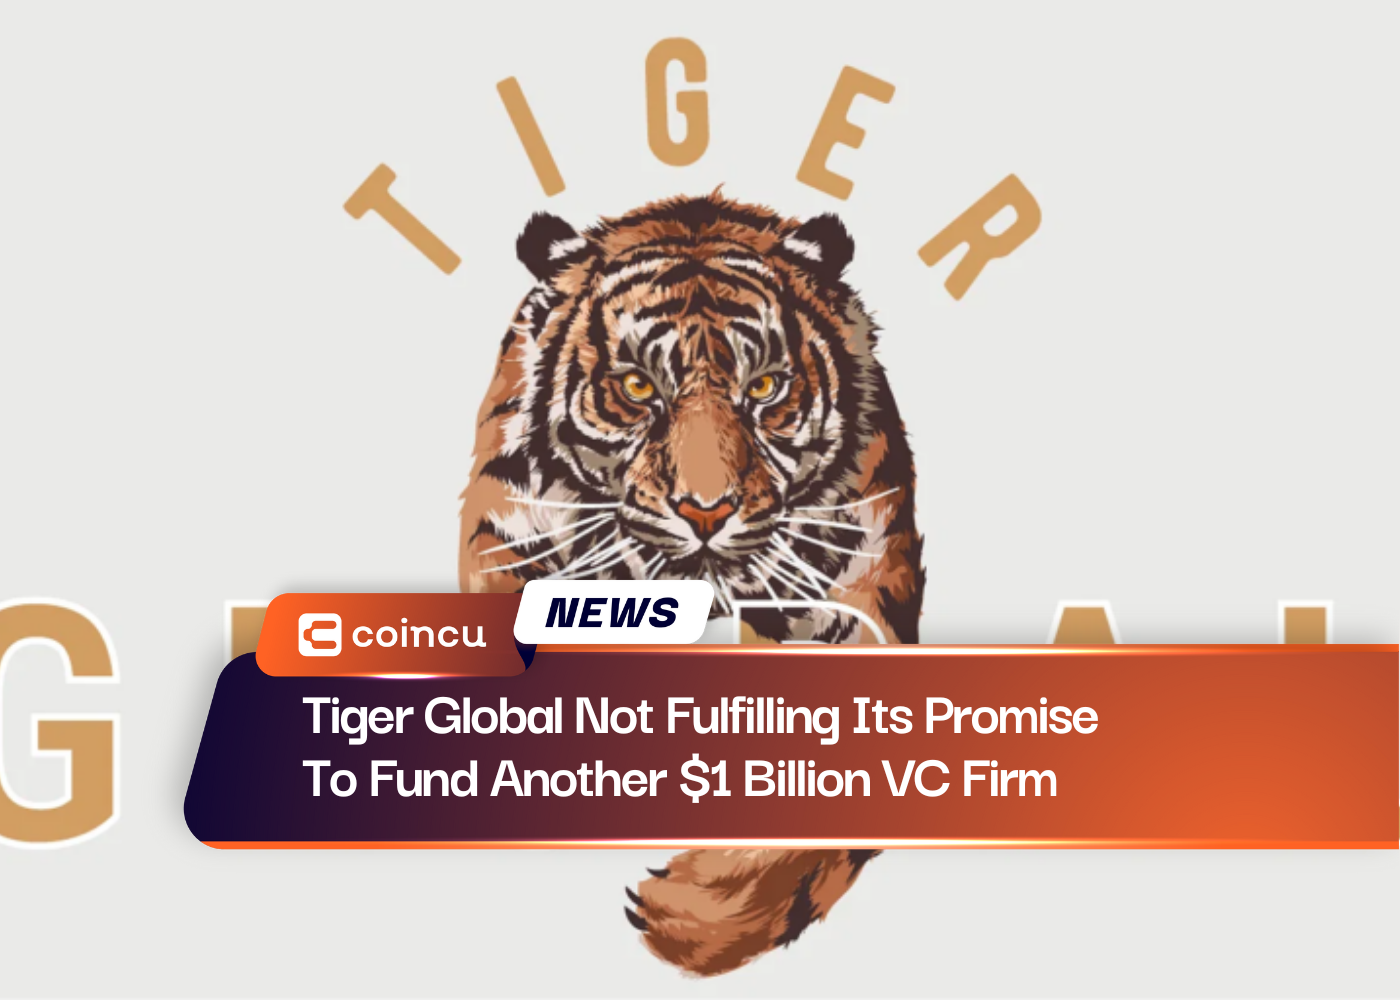 Tiger Global Not Fulfilling Its Promise To Fund Another $1 Billion VC Firm